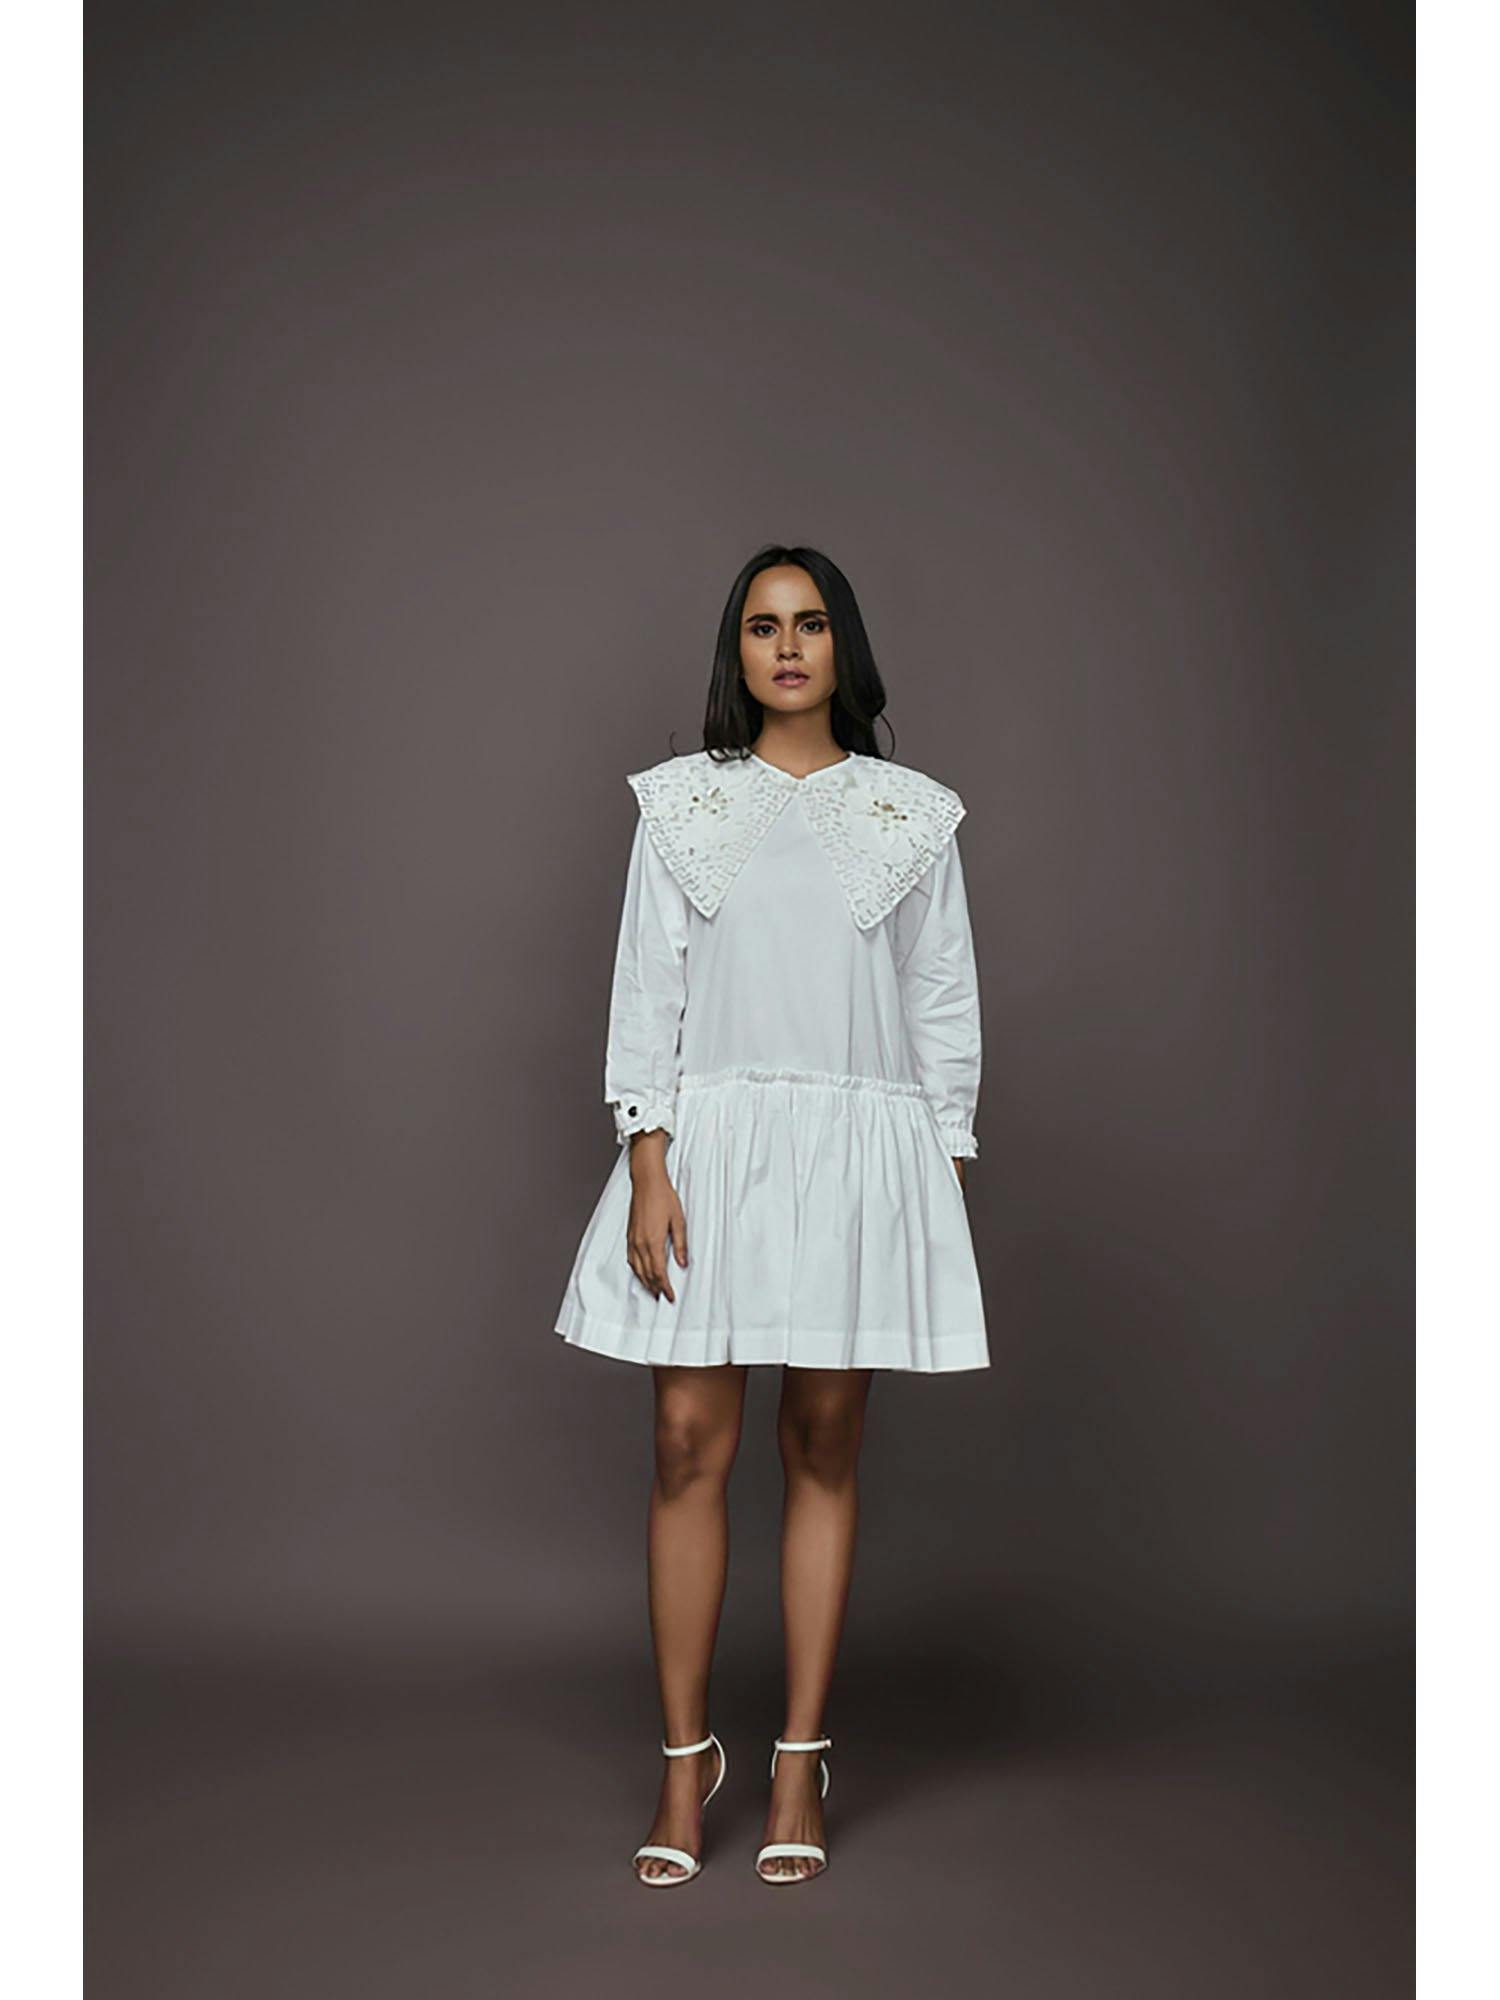 White dress with puff sleeves and frill bottom NN-1121-W WHITE, a product by Deepika Arora